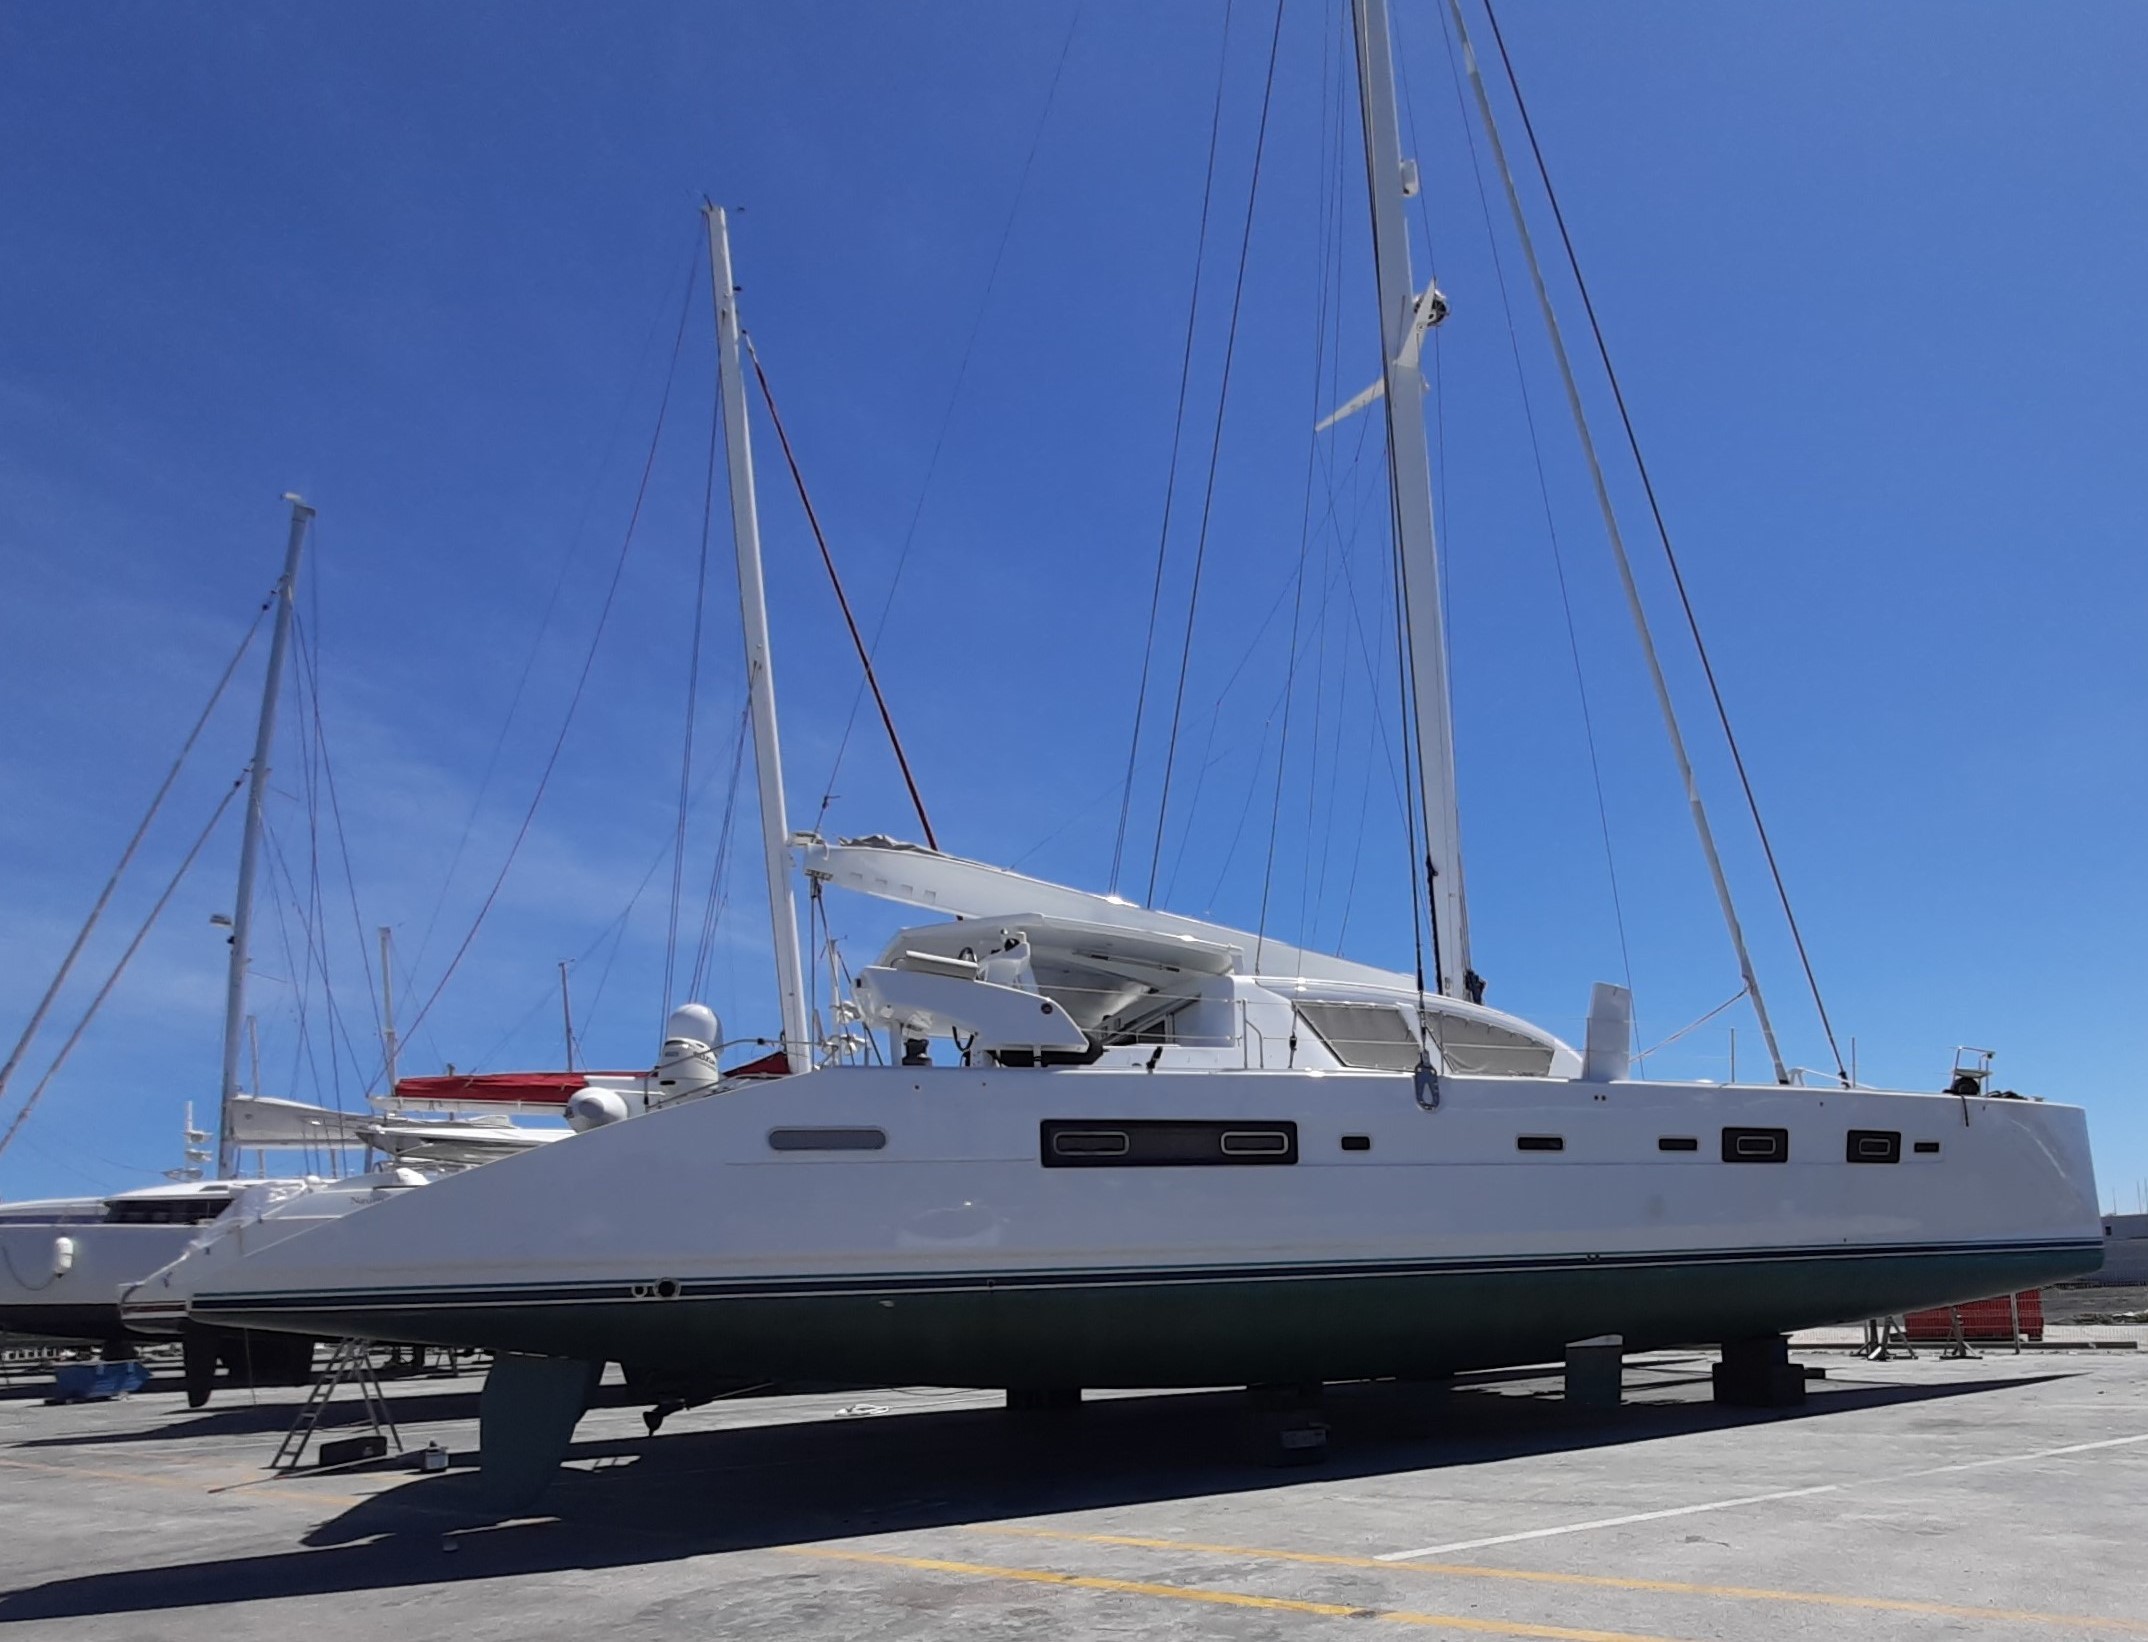 Catana 65 out of water